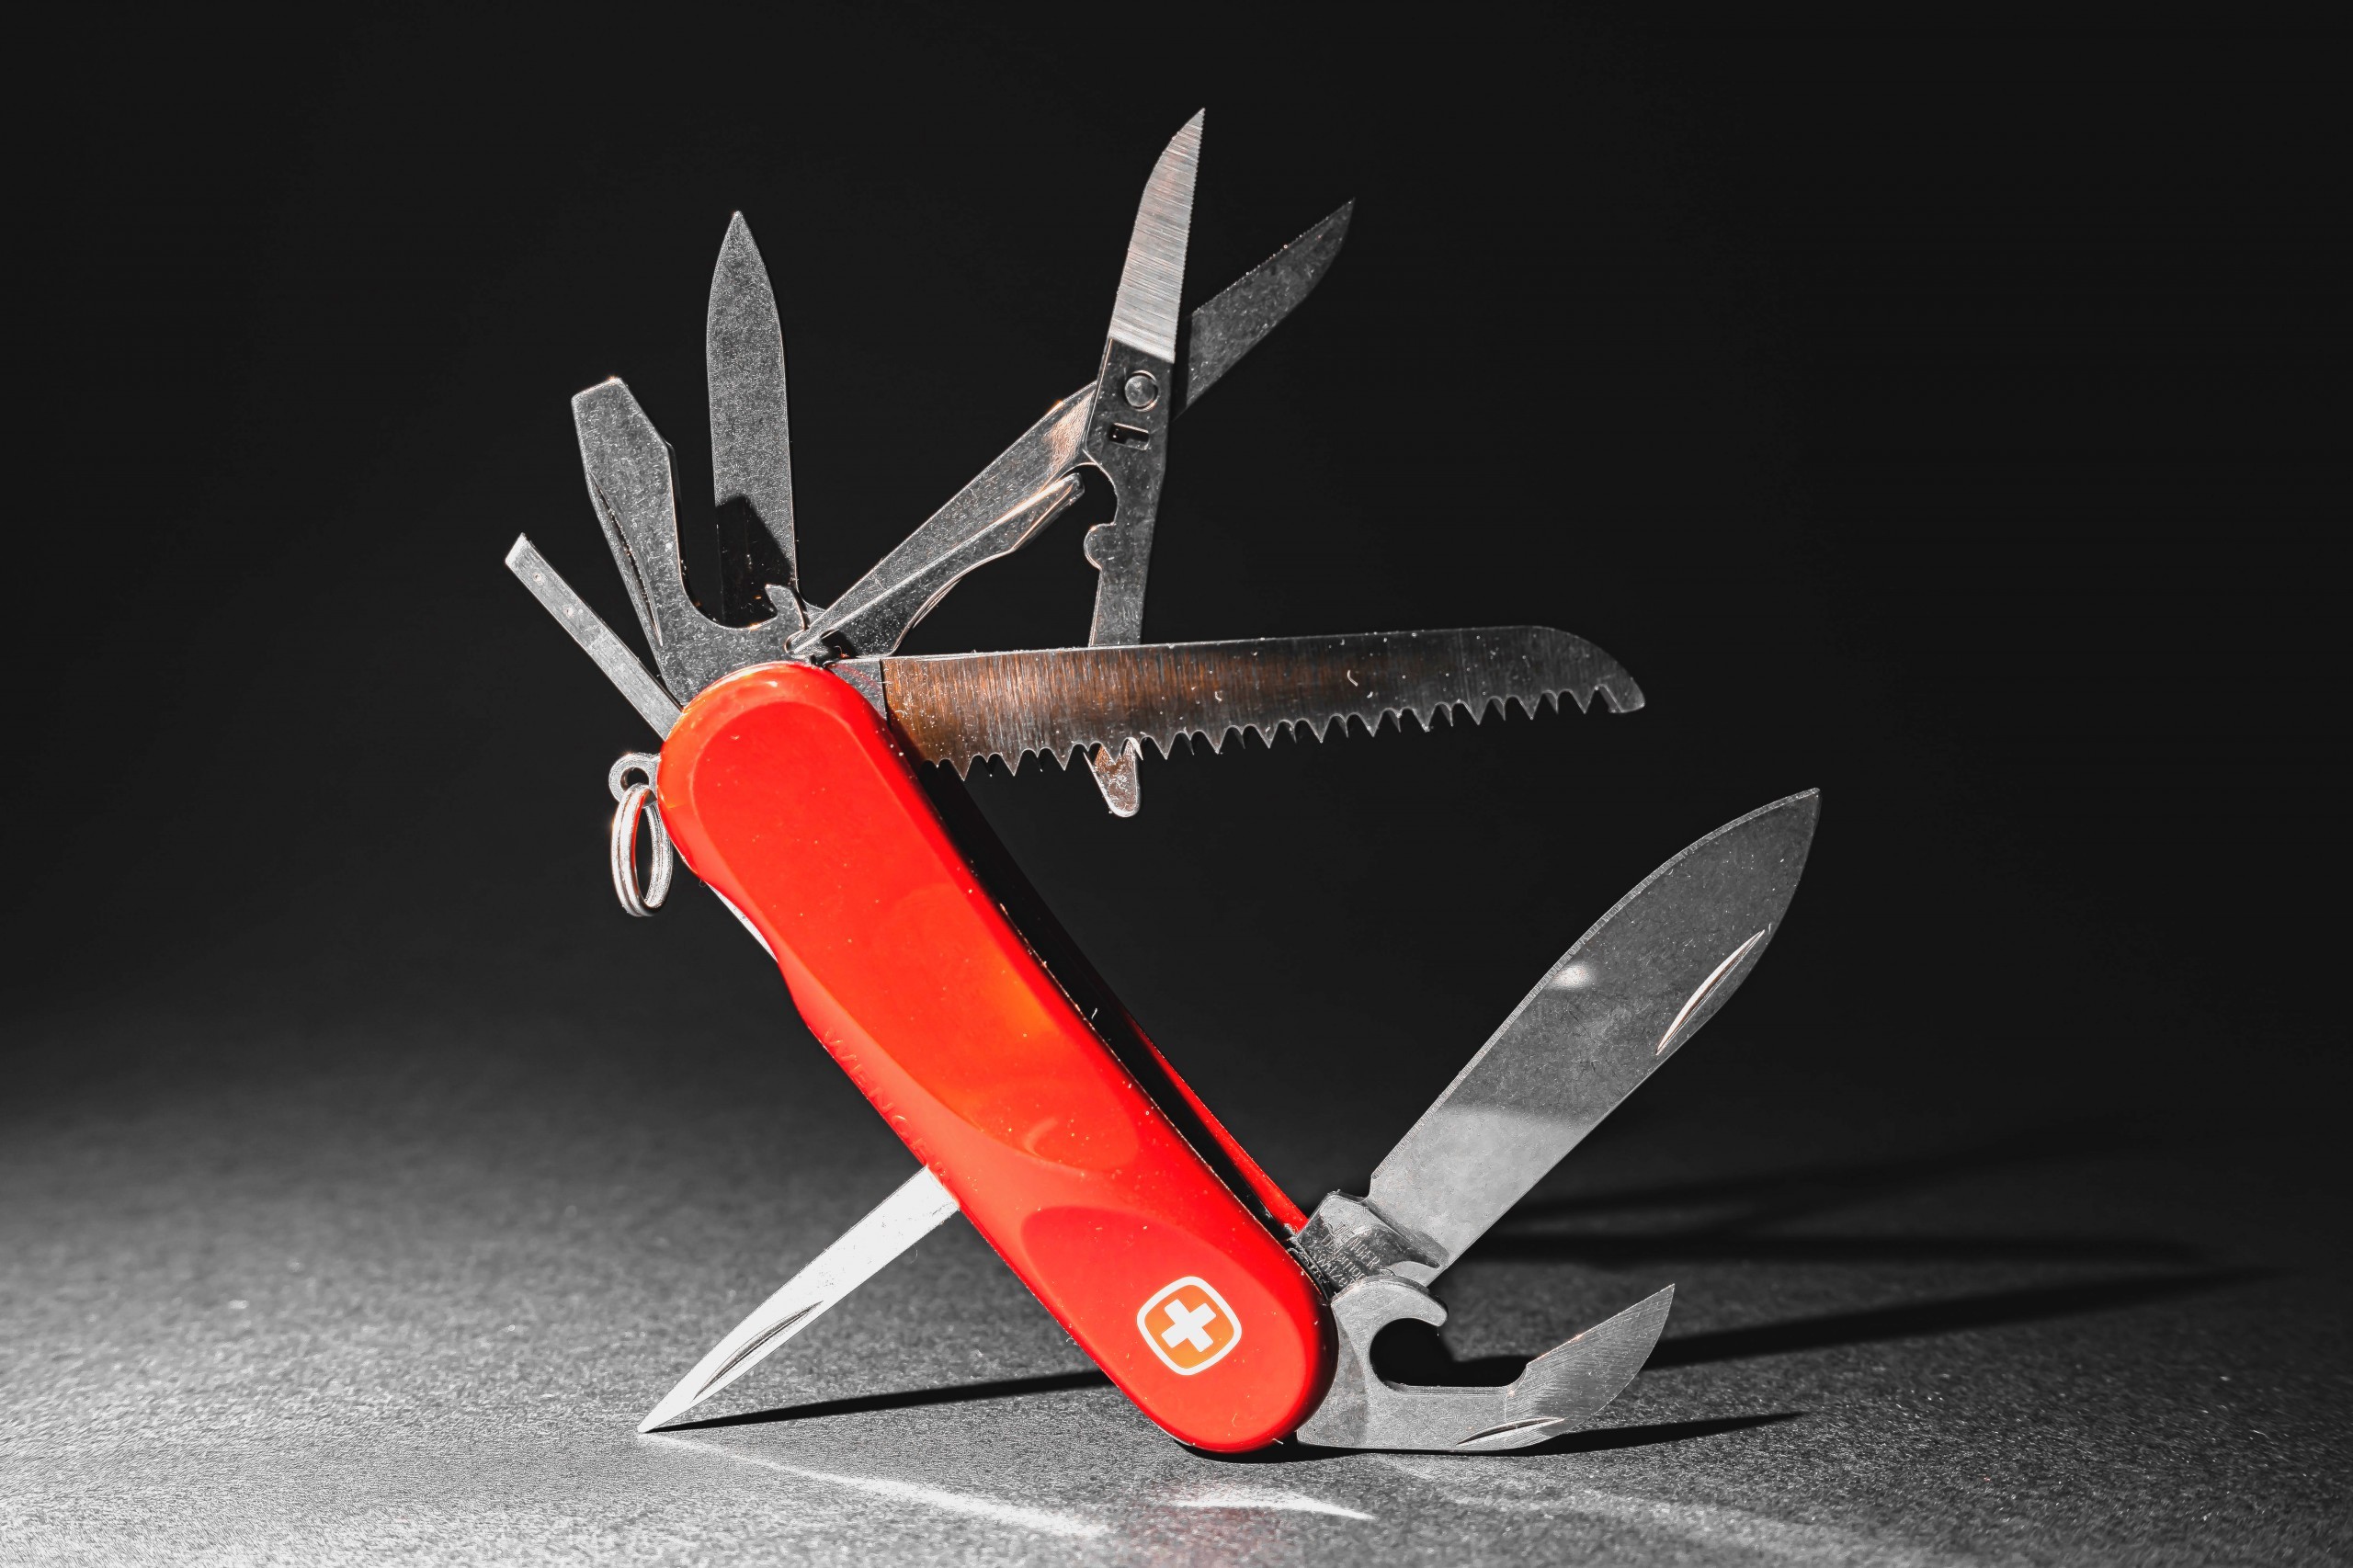 A genuine Swiss Army Knife with its many tools